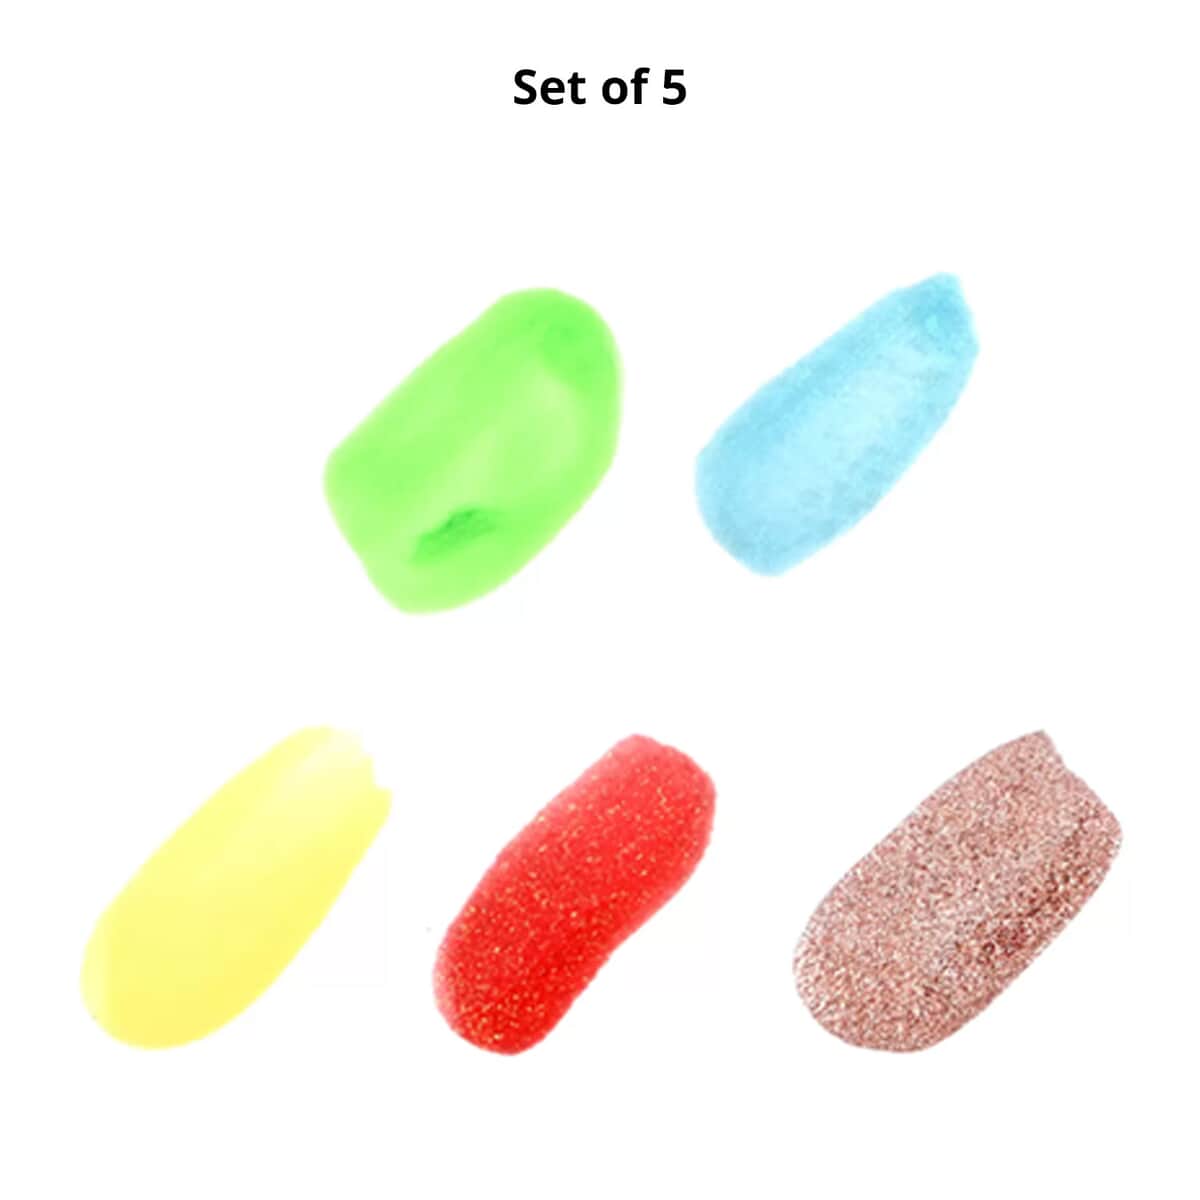 Set of 5 Nail Enamel and Hardener Nail Polish (Assorted Colors) image number 5